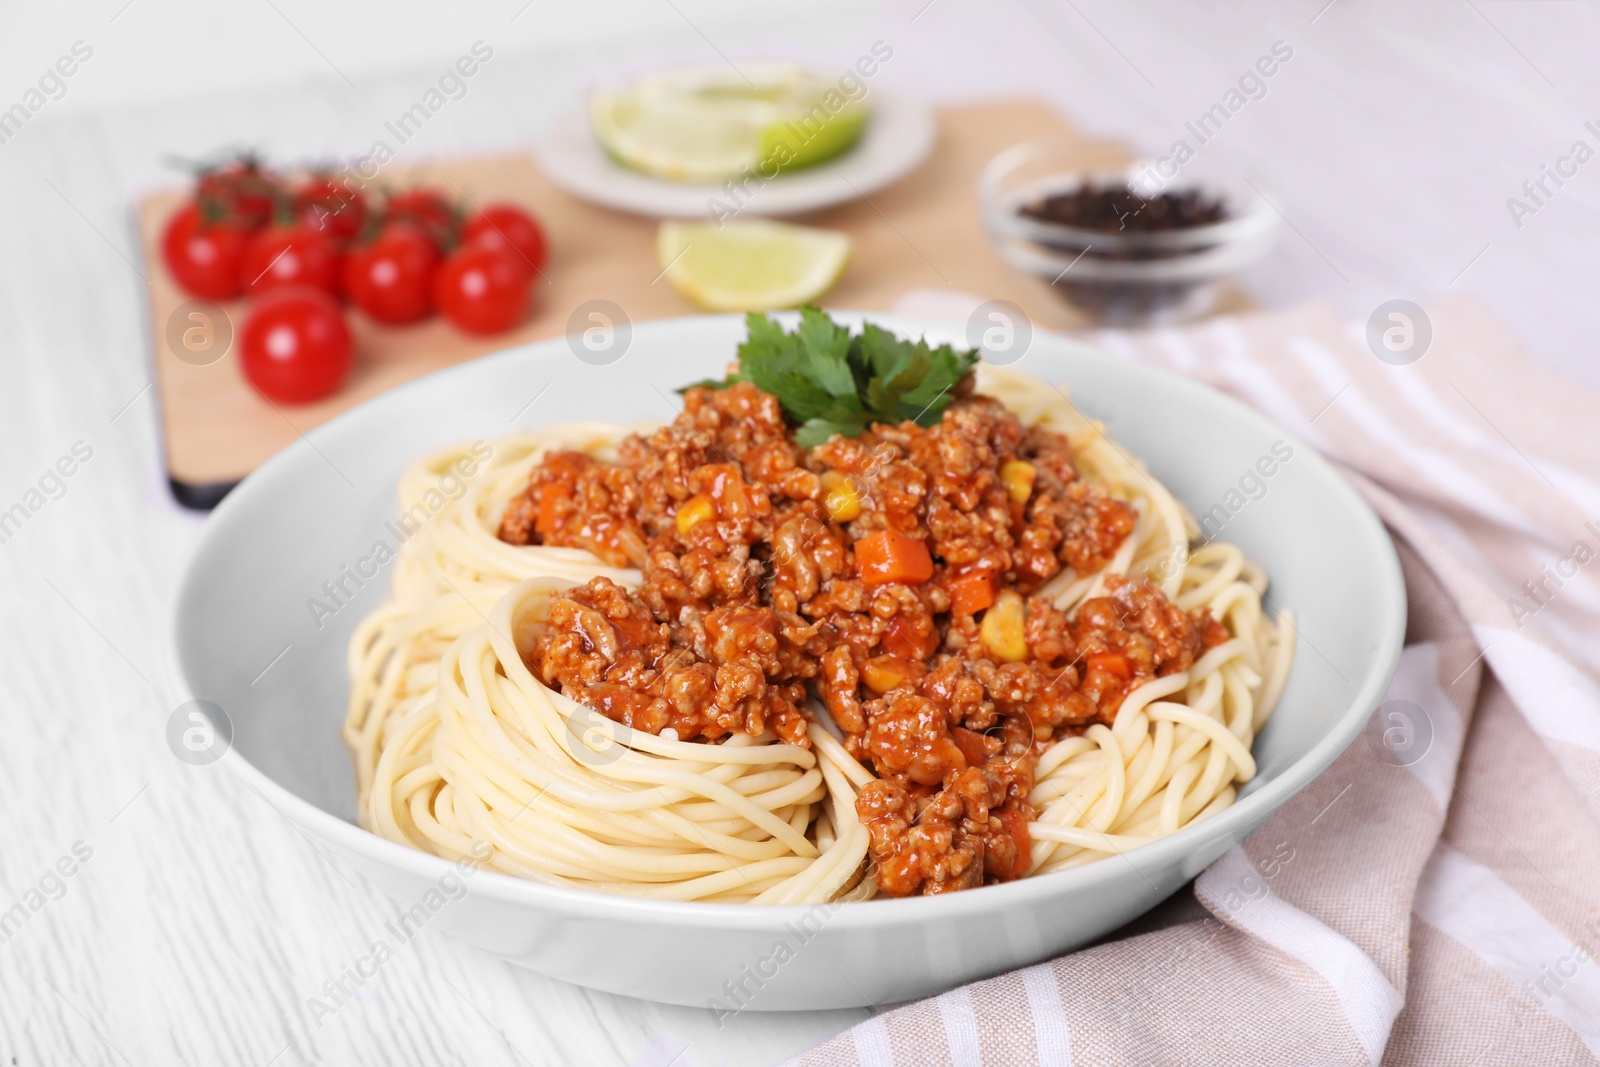 Photo of Tasty dish with fried minced meat, spaghetti, carrot and corn on white wooden table, closeup